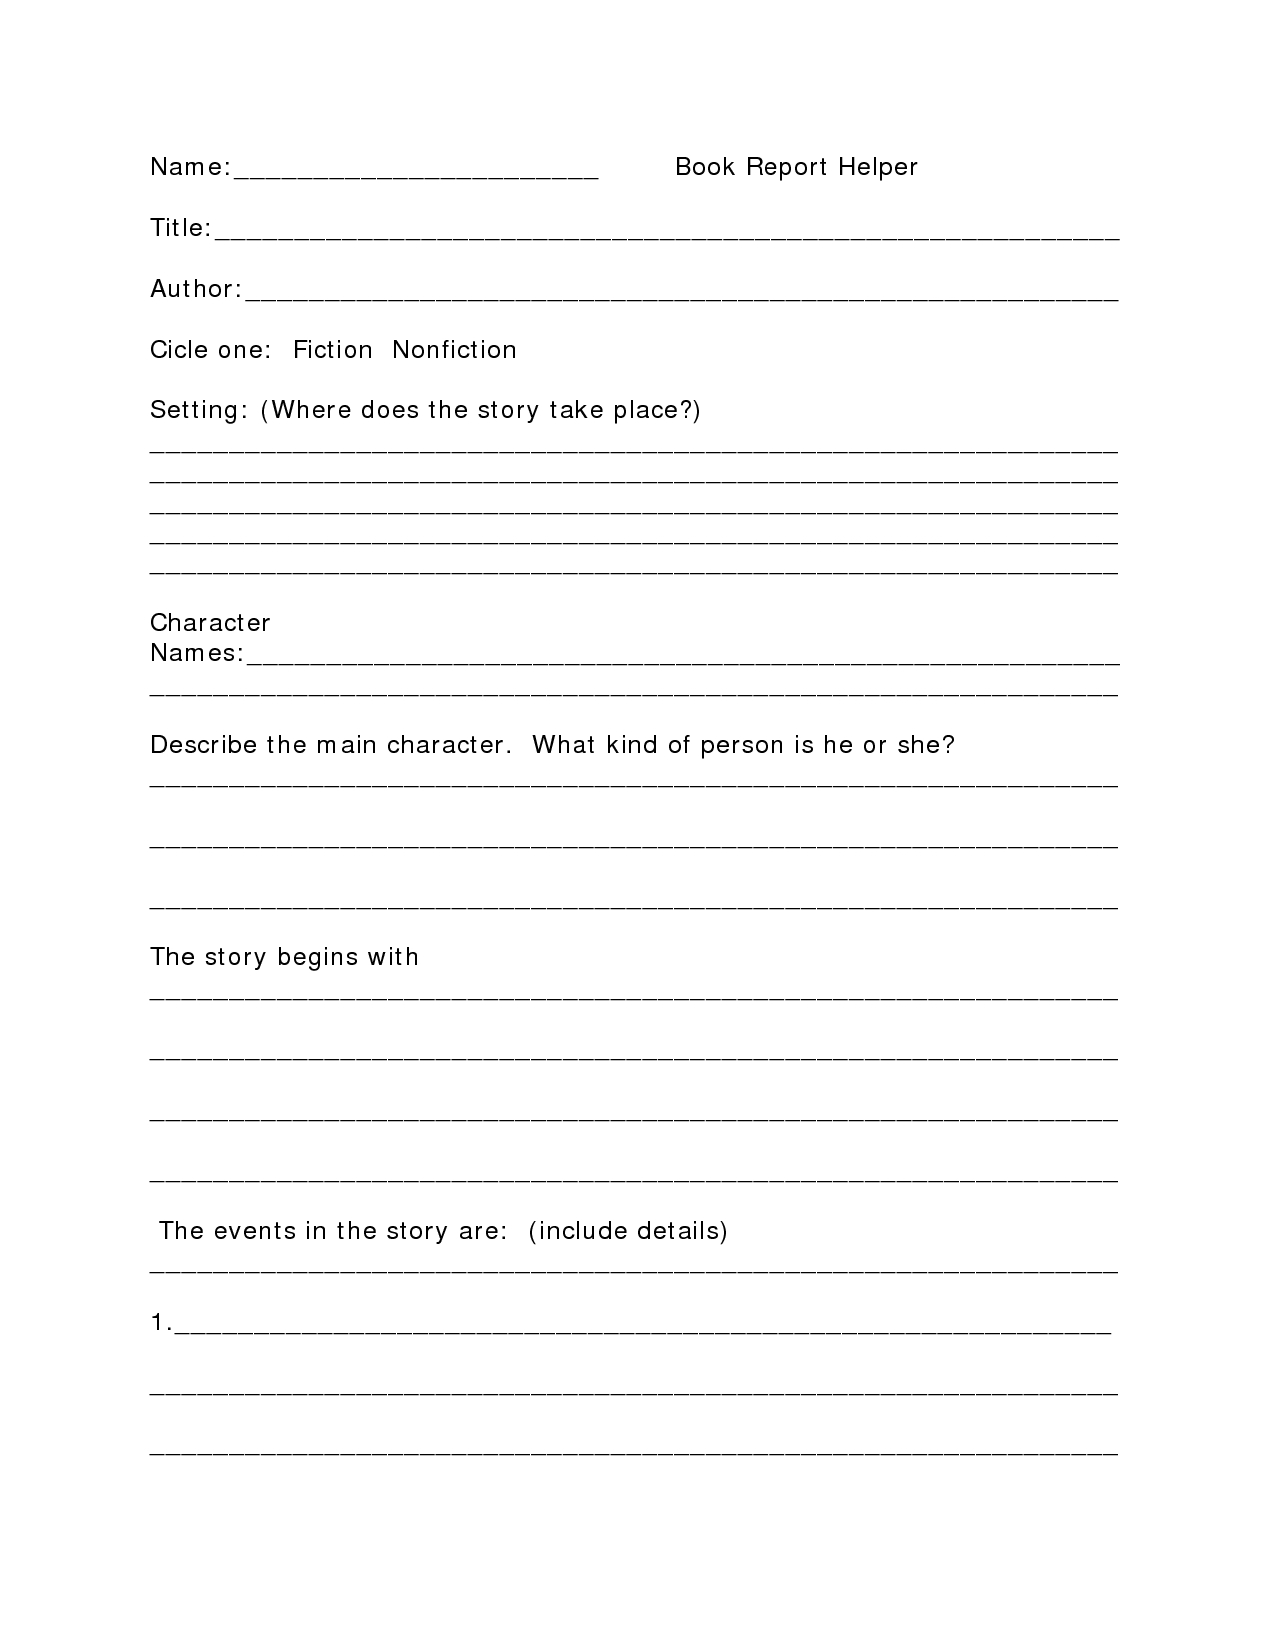 School Book Report Template – Teplates For Every Day In Book Report Template High School